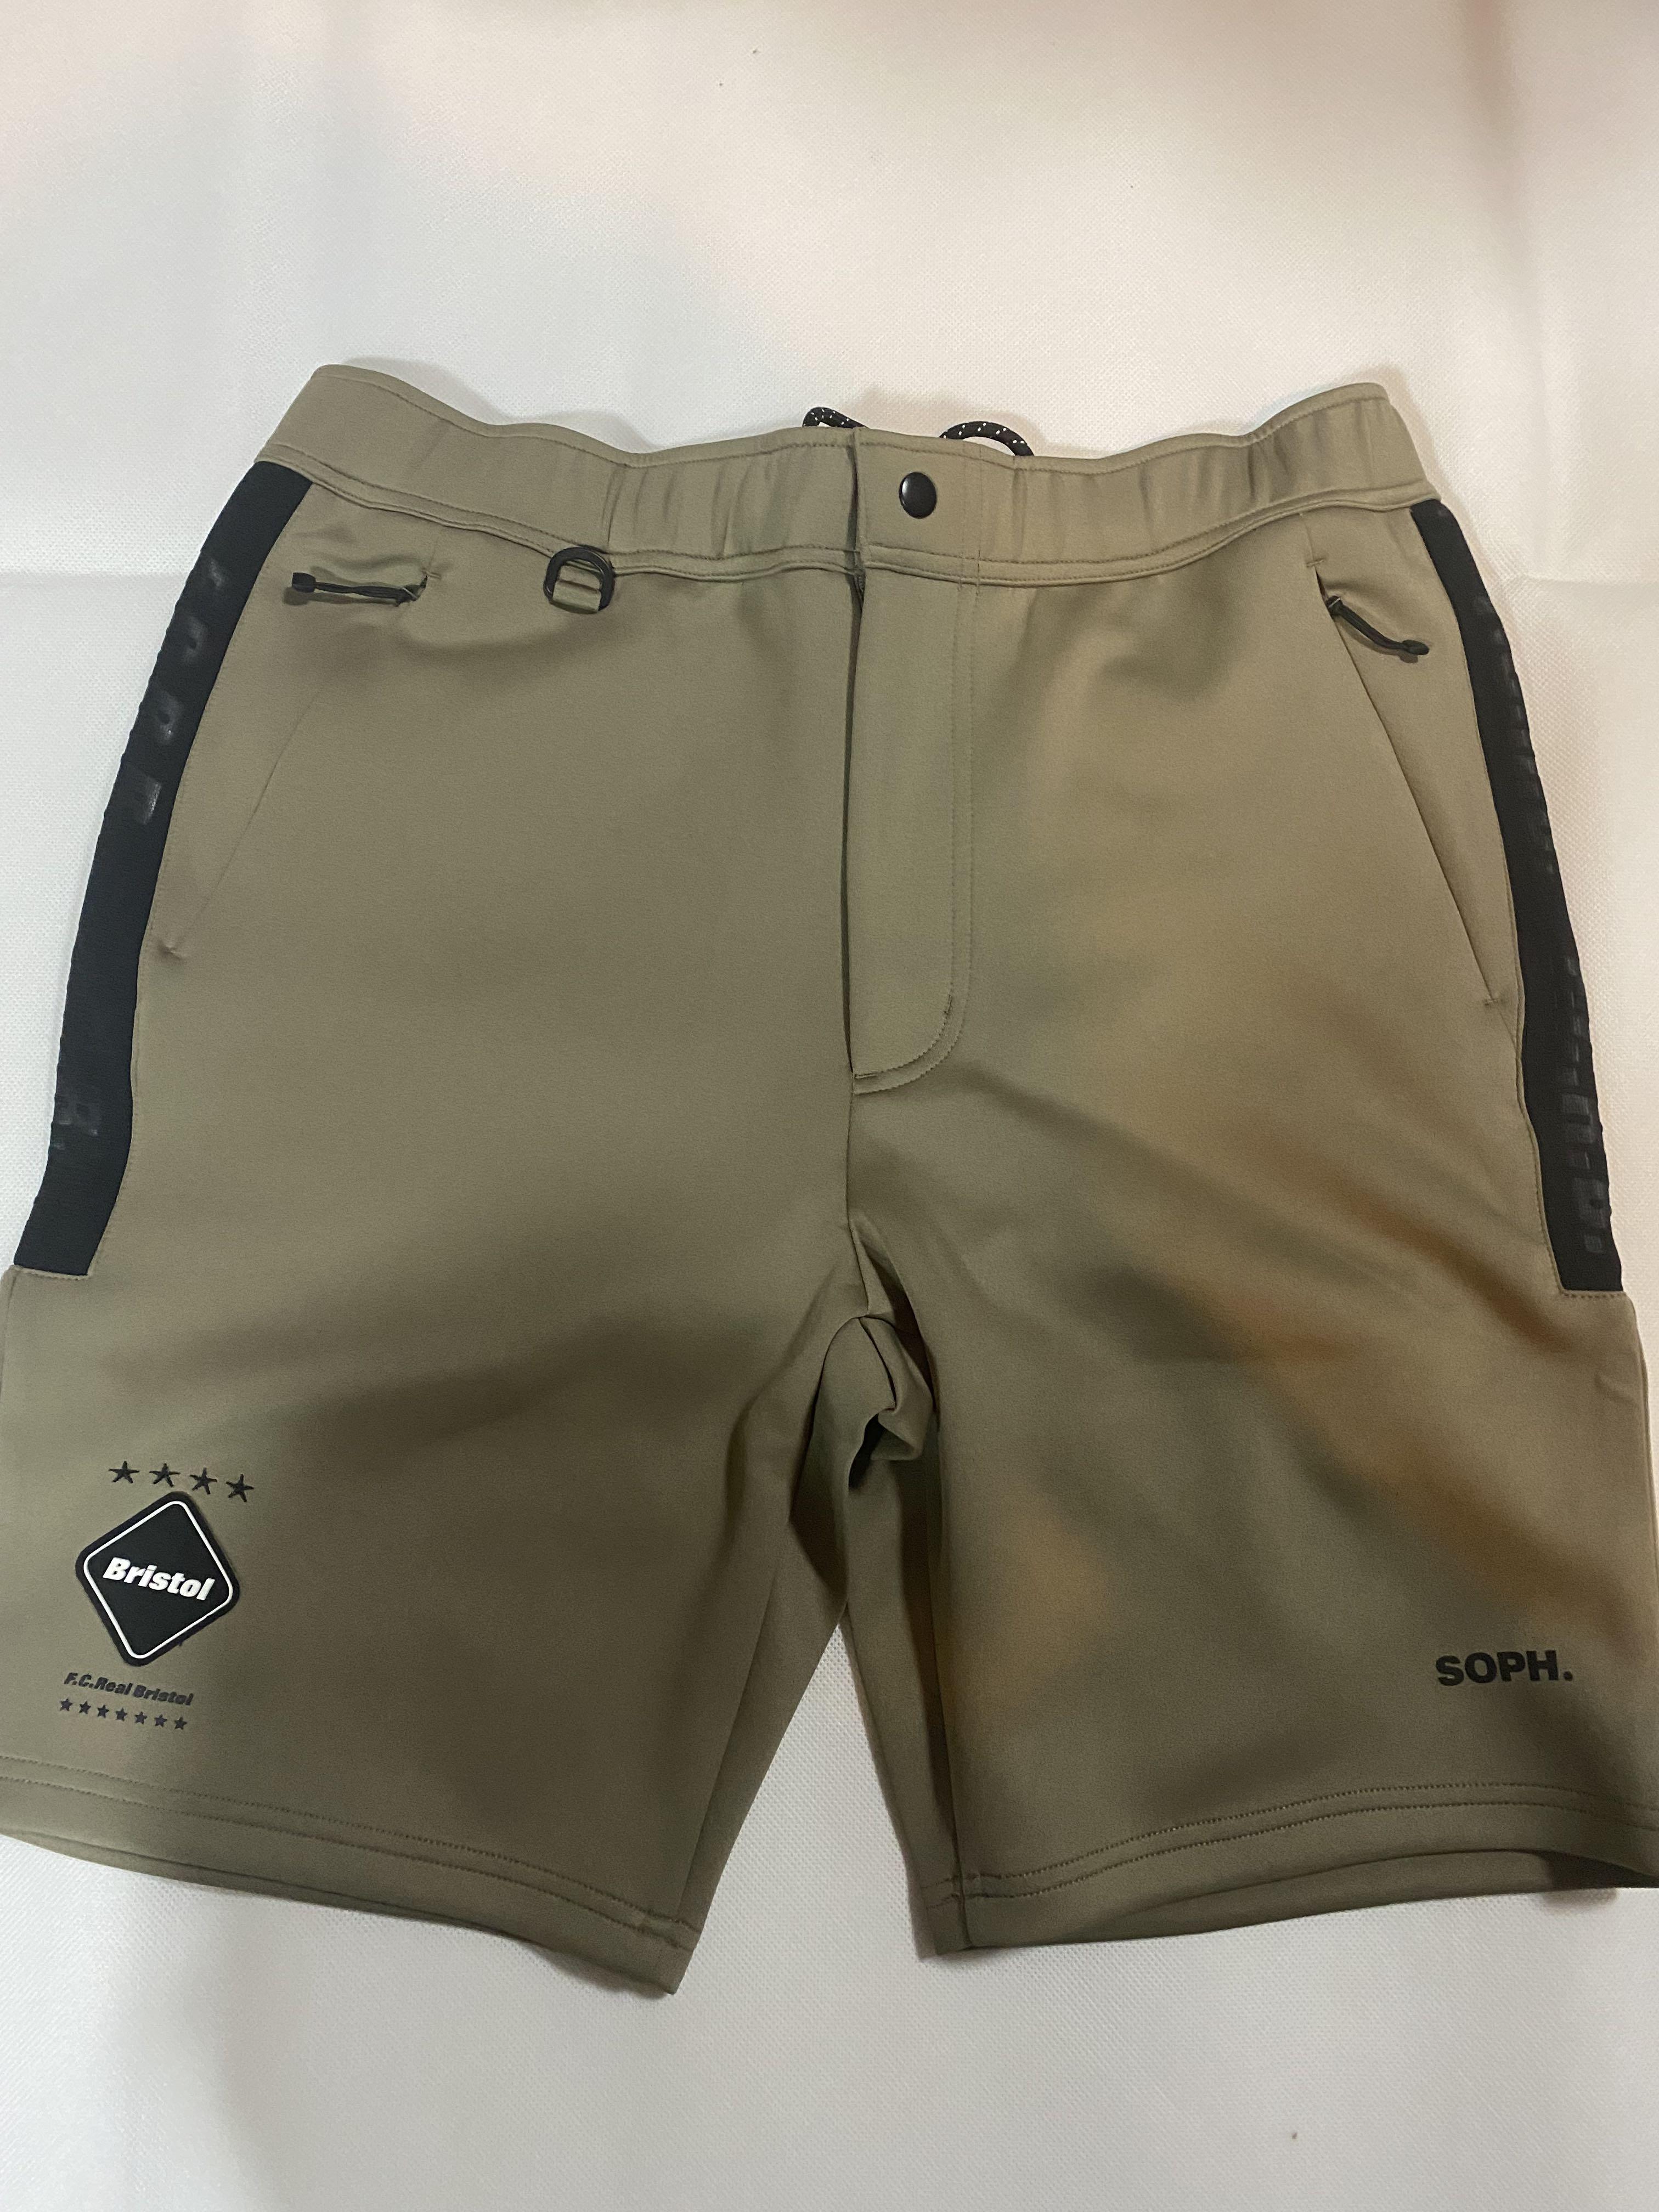 UNISEX S/M F.C.R.B.(F.C.Real Bristol) PDK SHORTS | ccfl.ie